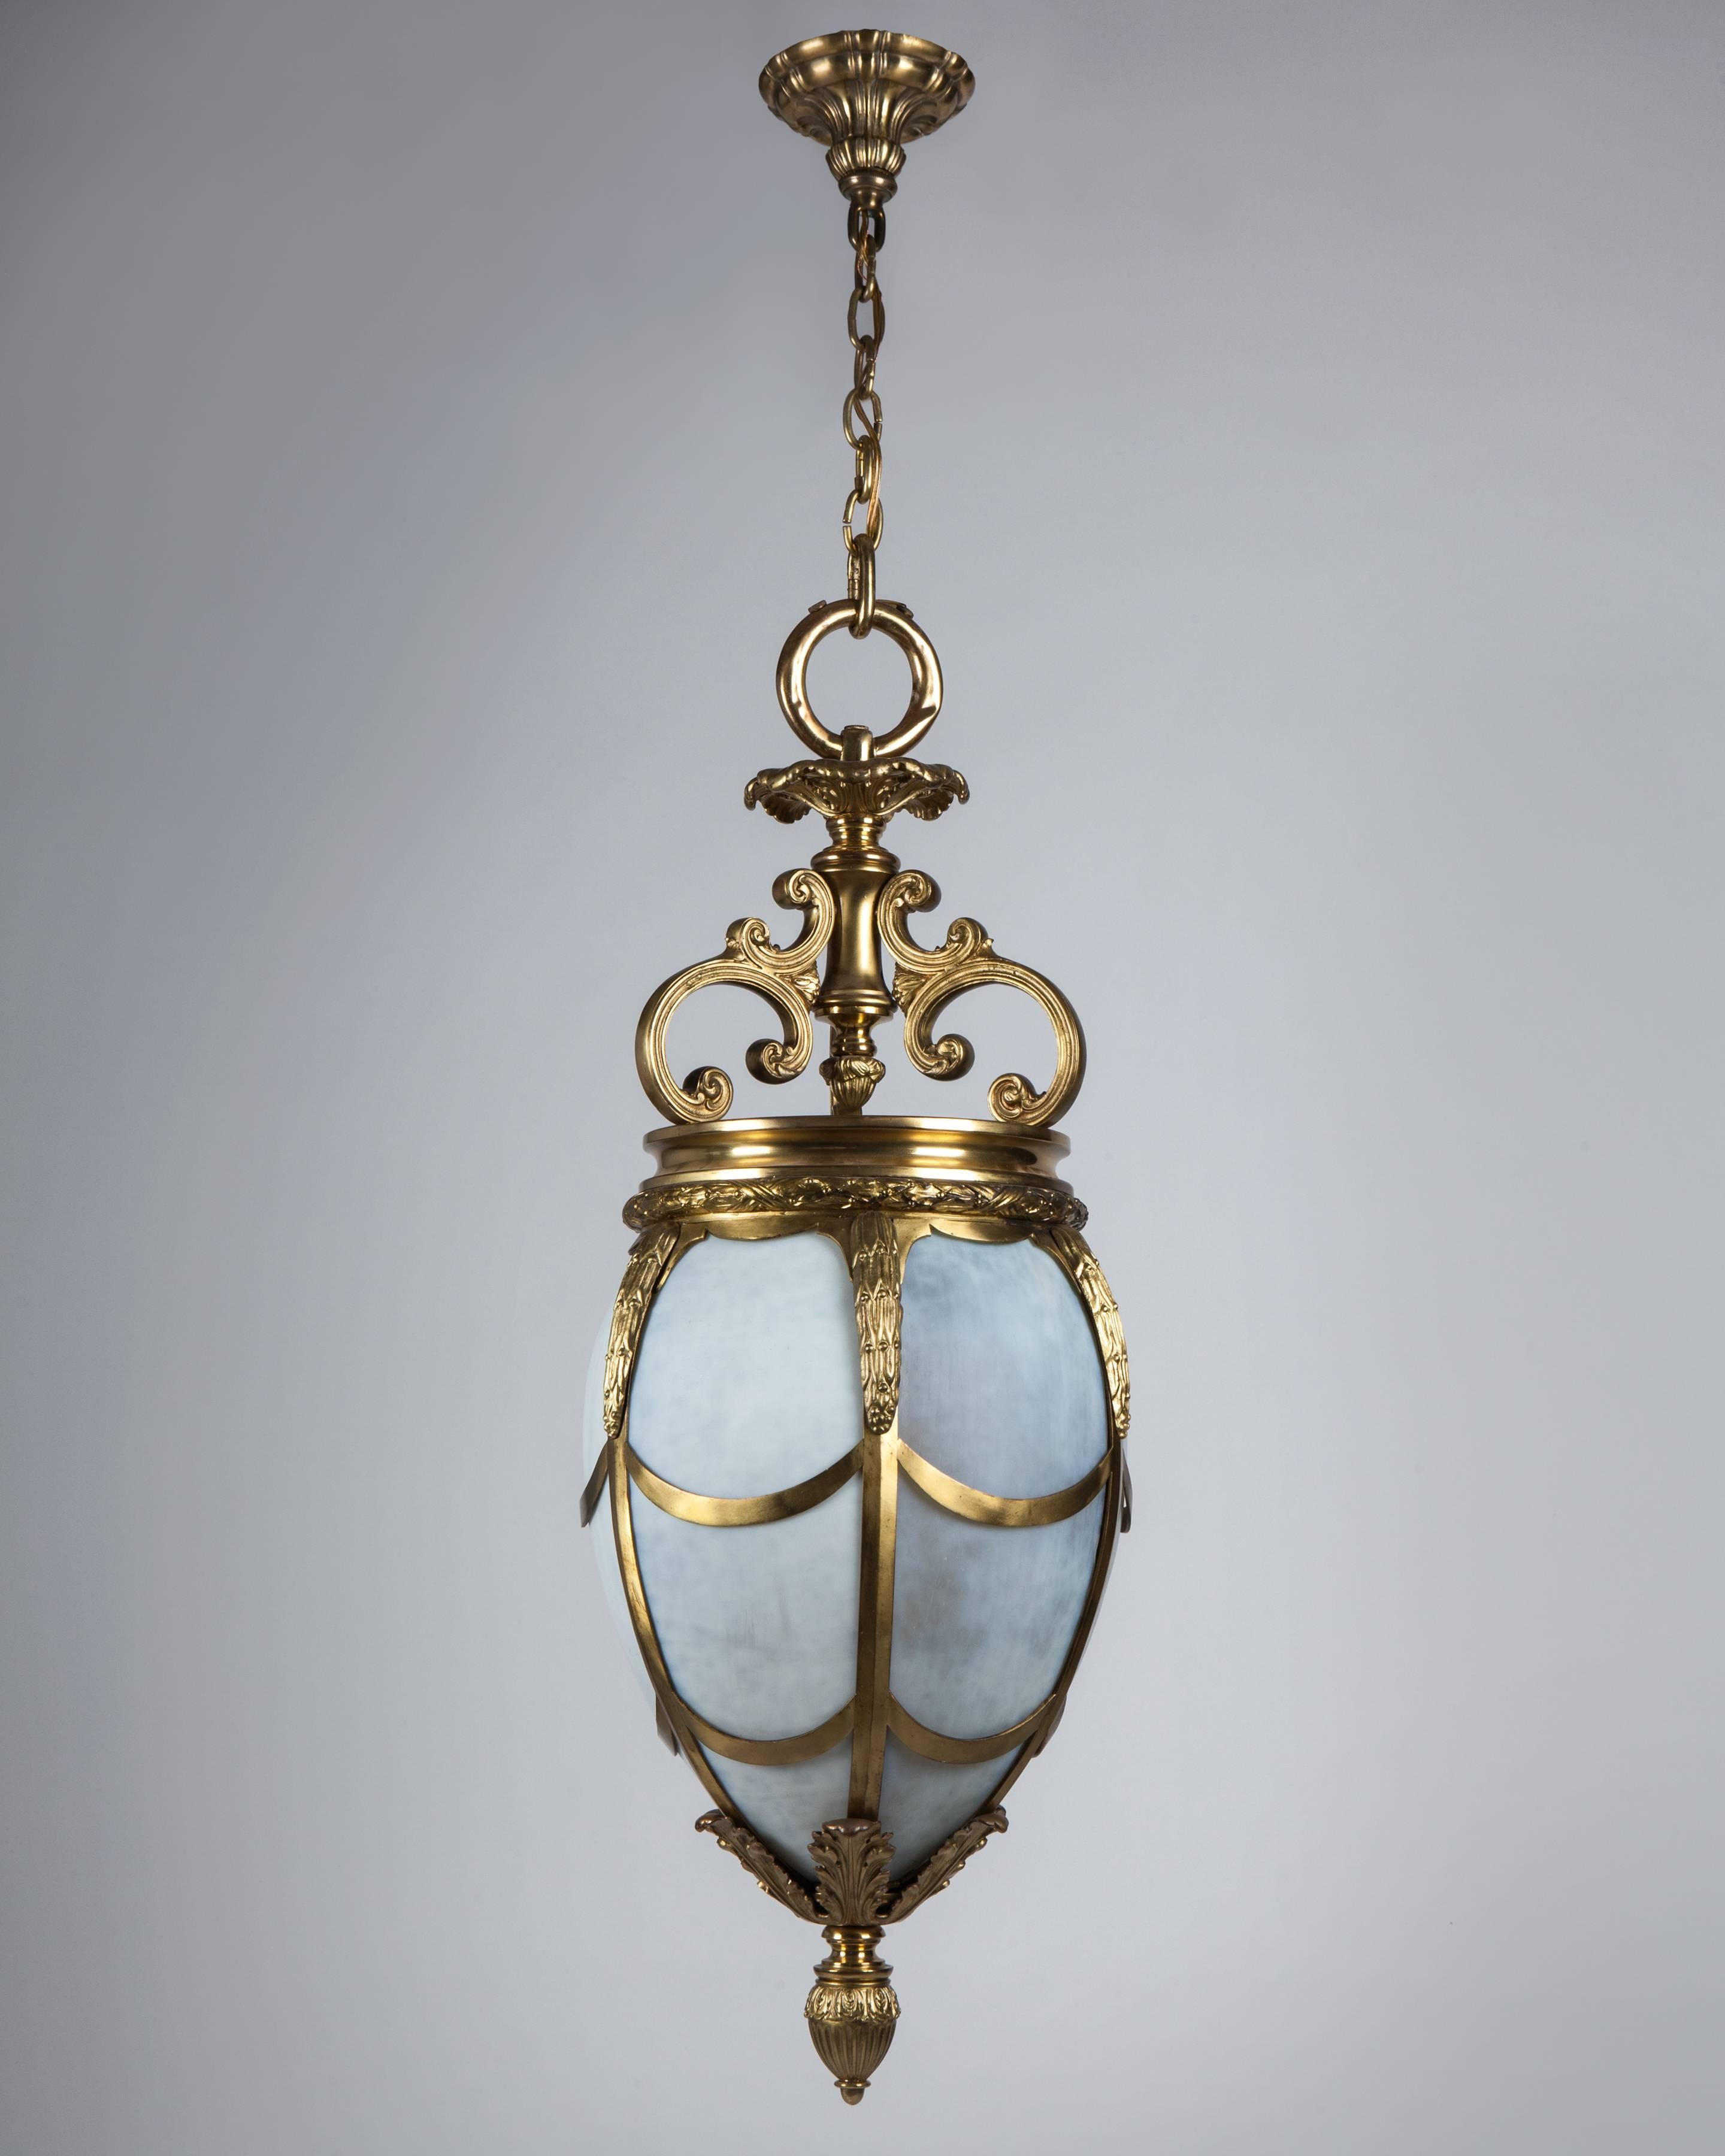 AHL4067
An antique gilded bronze oval pendant with detailed leaf decoration, glazed with its original curved frosted glass. Attributed to the Boston, Massachusetts maker Pettingell Andrews Co. Circa 1890.

Dimensions:
Current height: 52